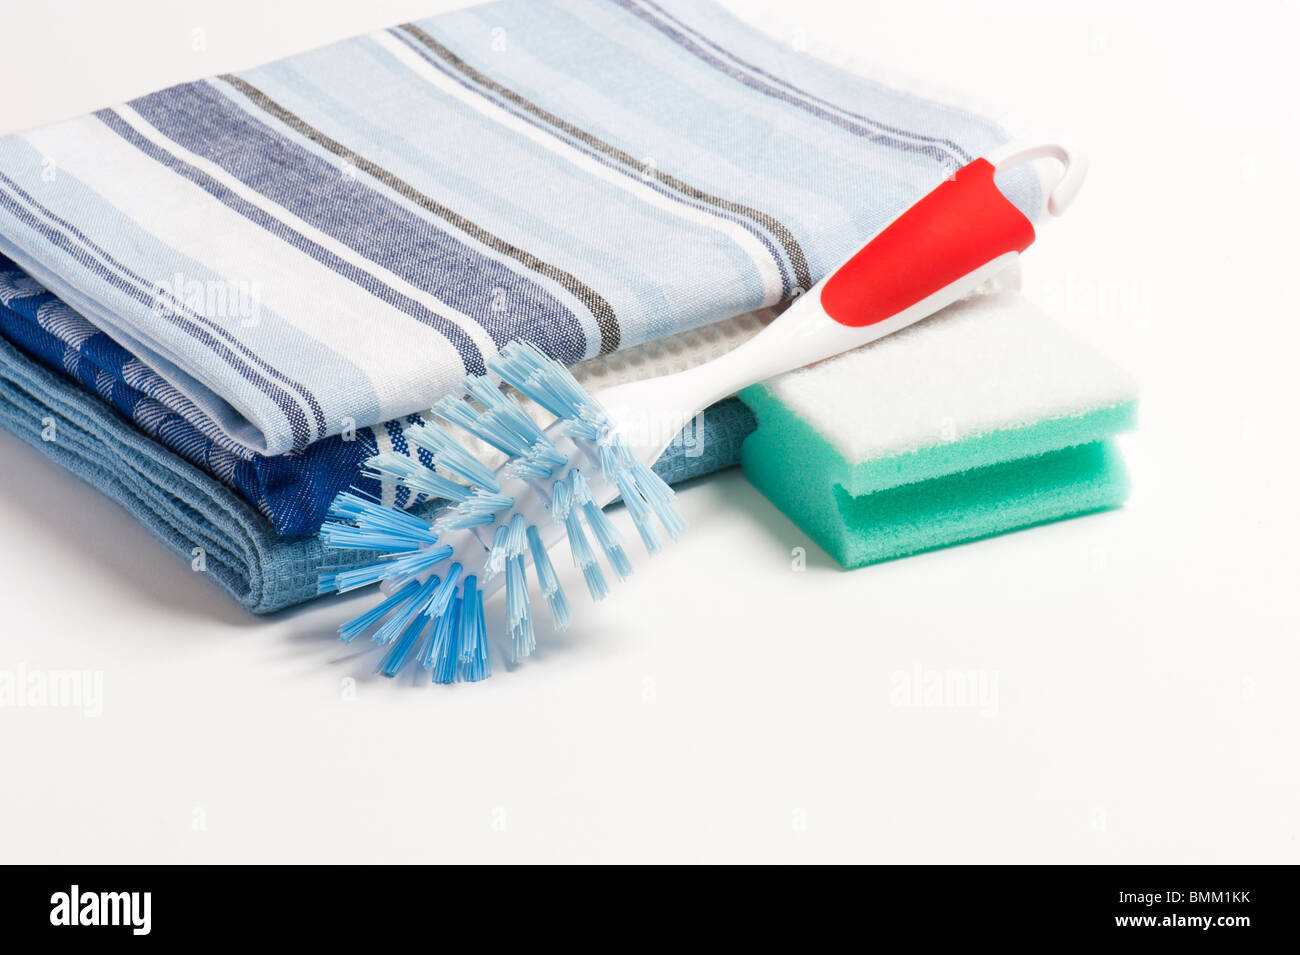 A Washing Up Brush, Scouring Pad and Three Folded Drying Cloths Stock Photo